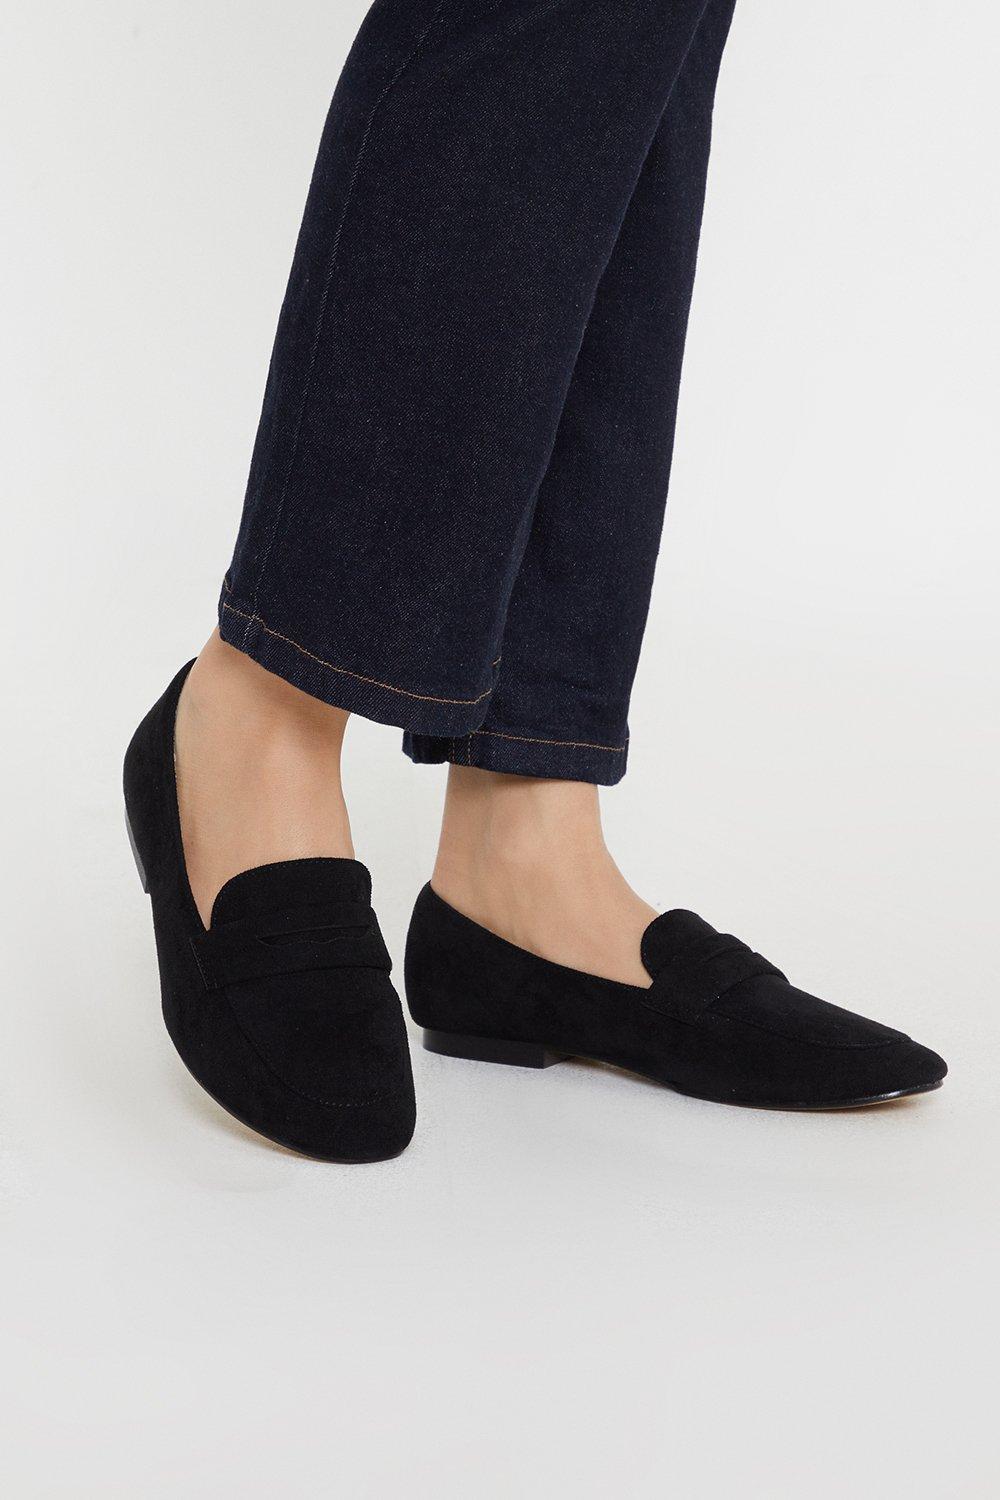 Women’s Leah Round Toe Penny Loafers - natural black - 7